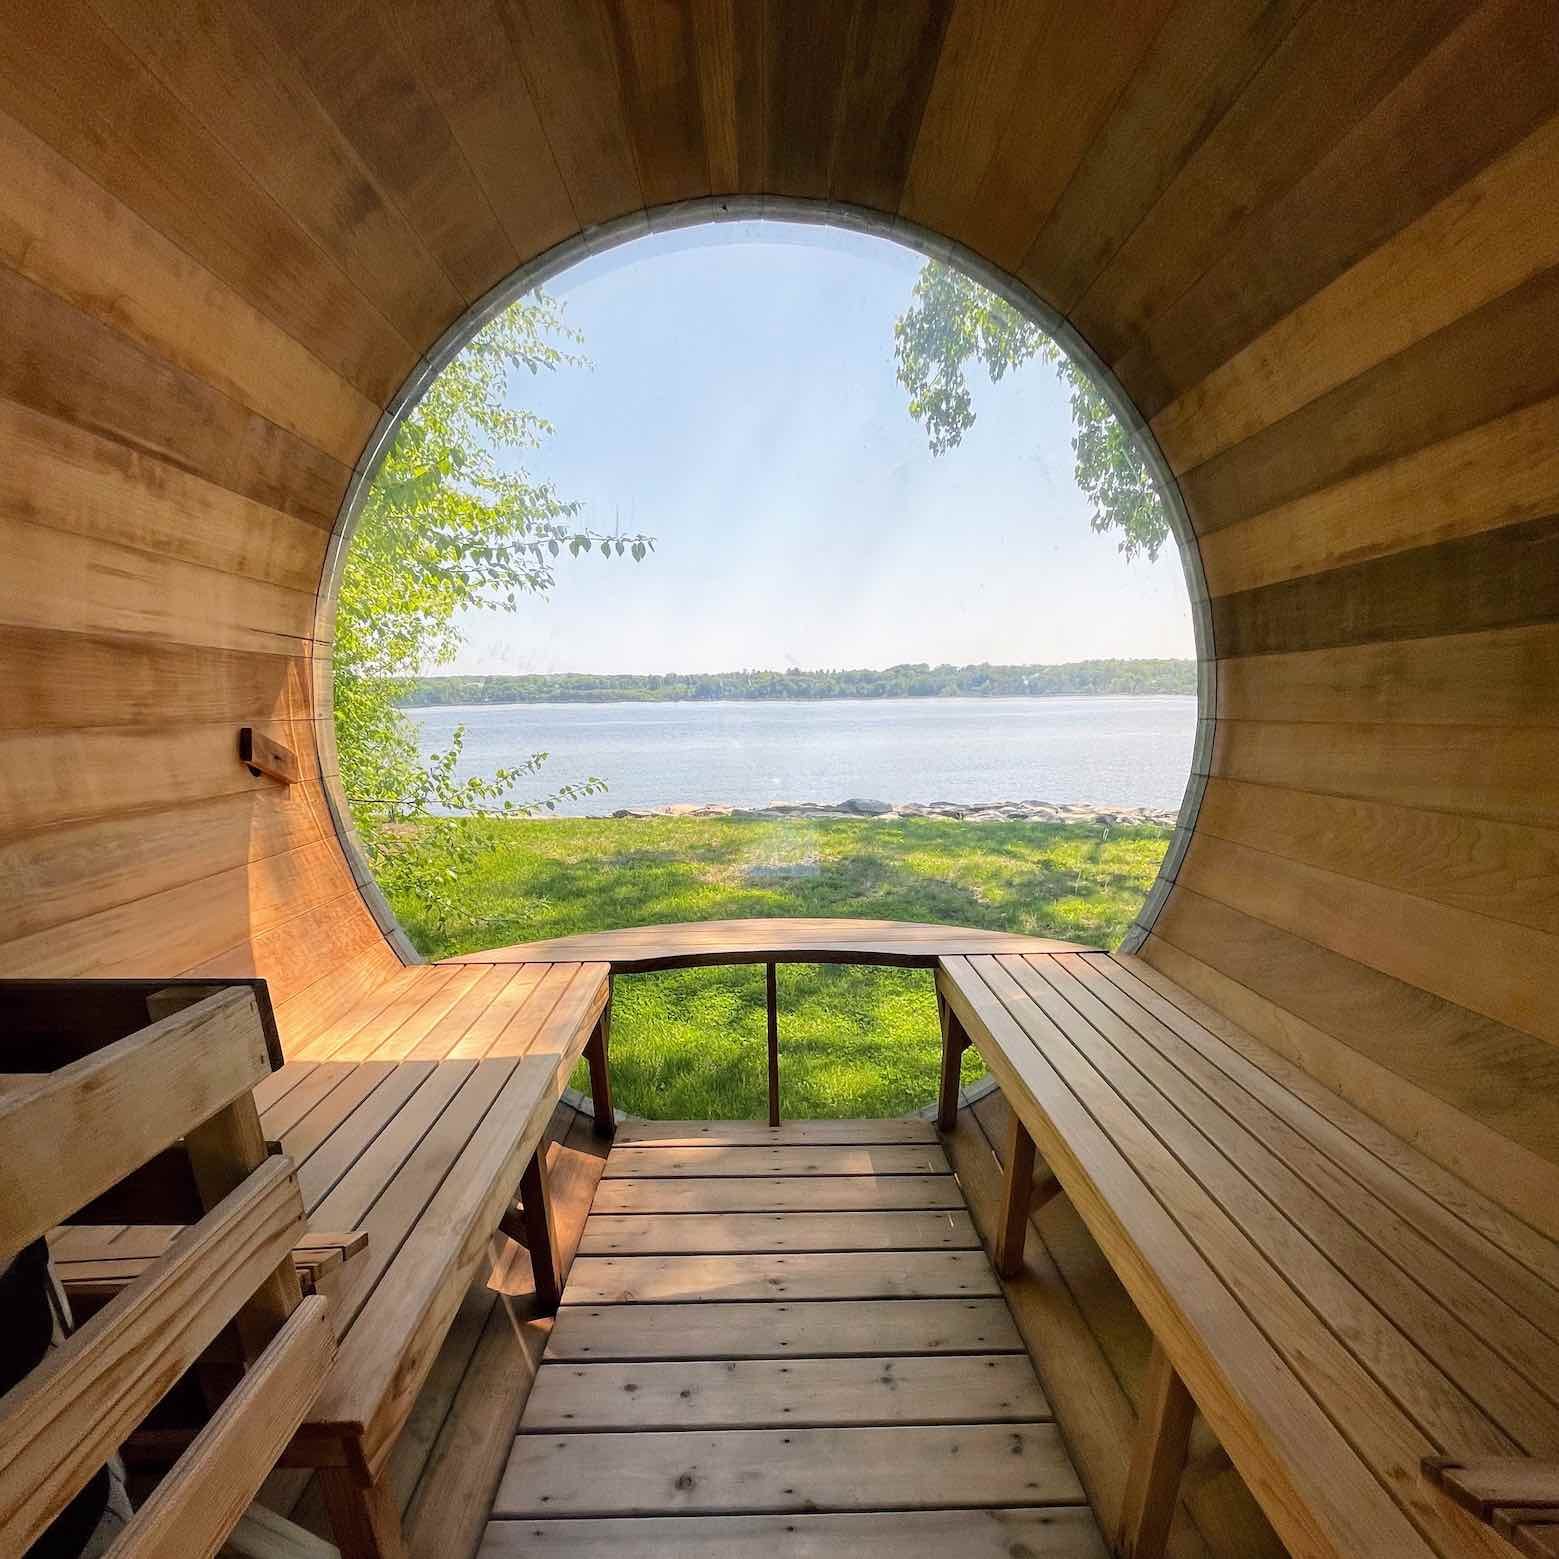 Looking out from inside a sauna